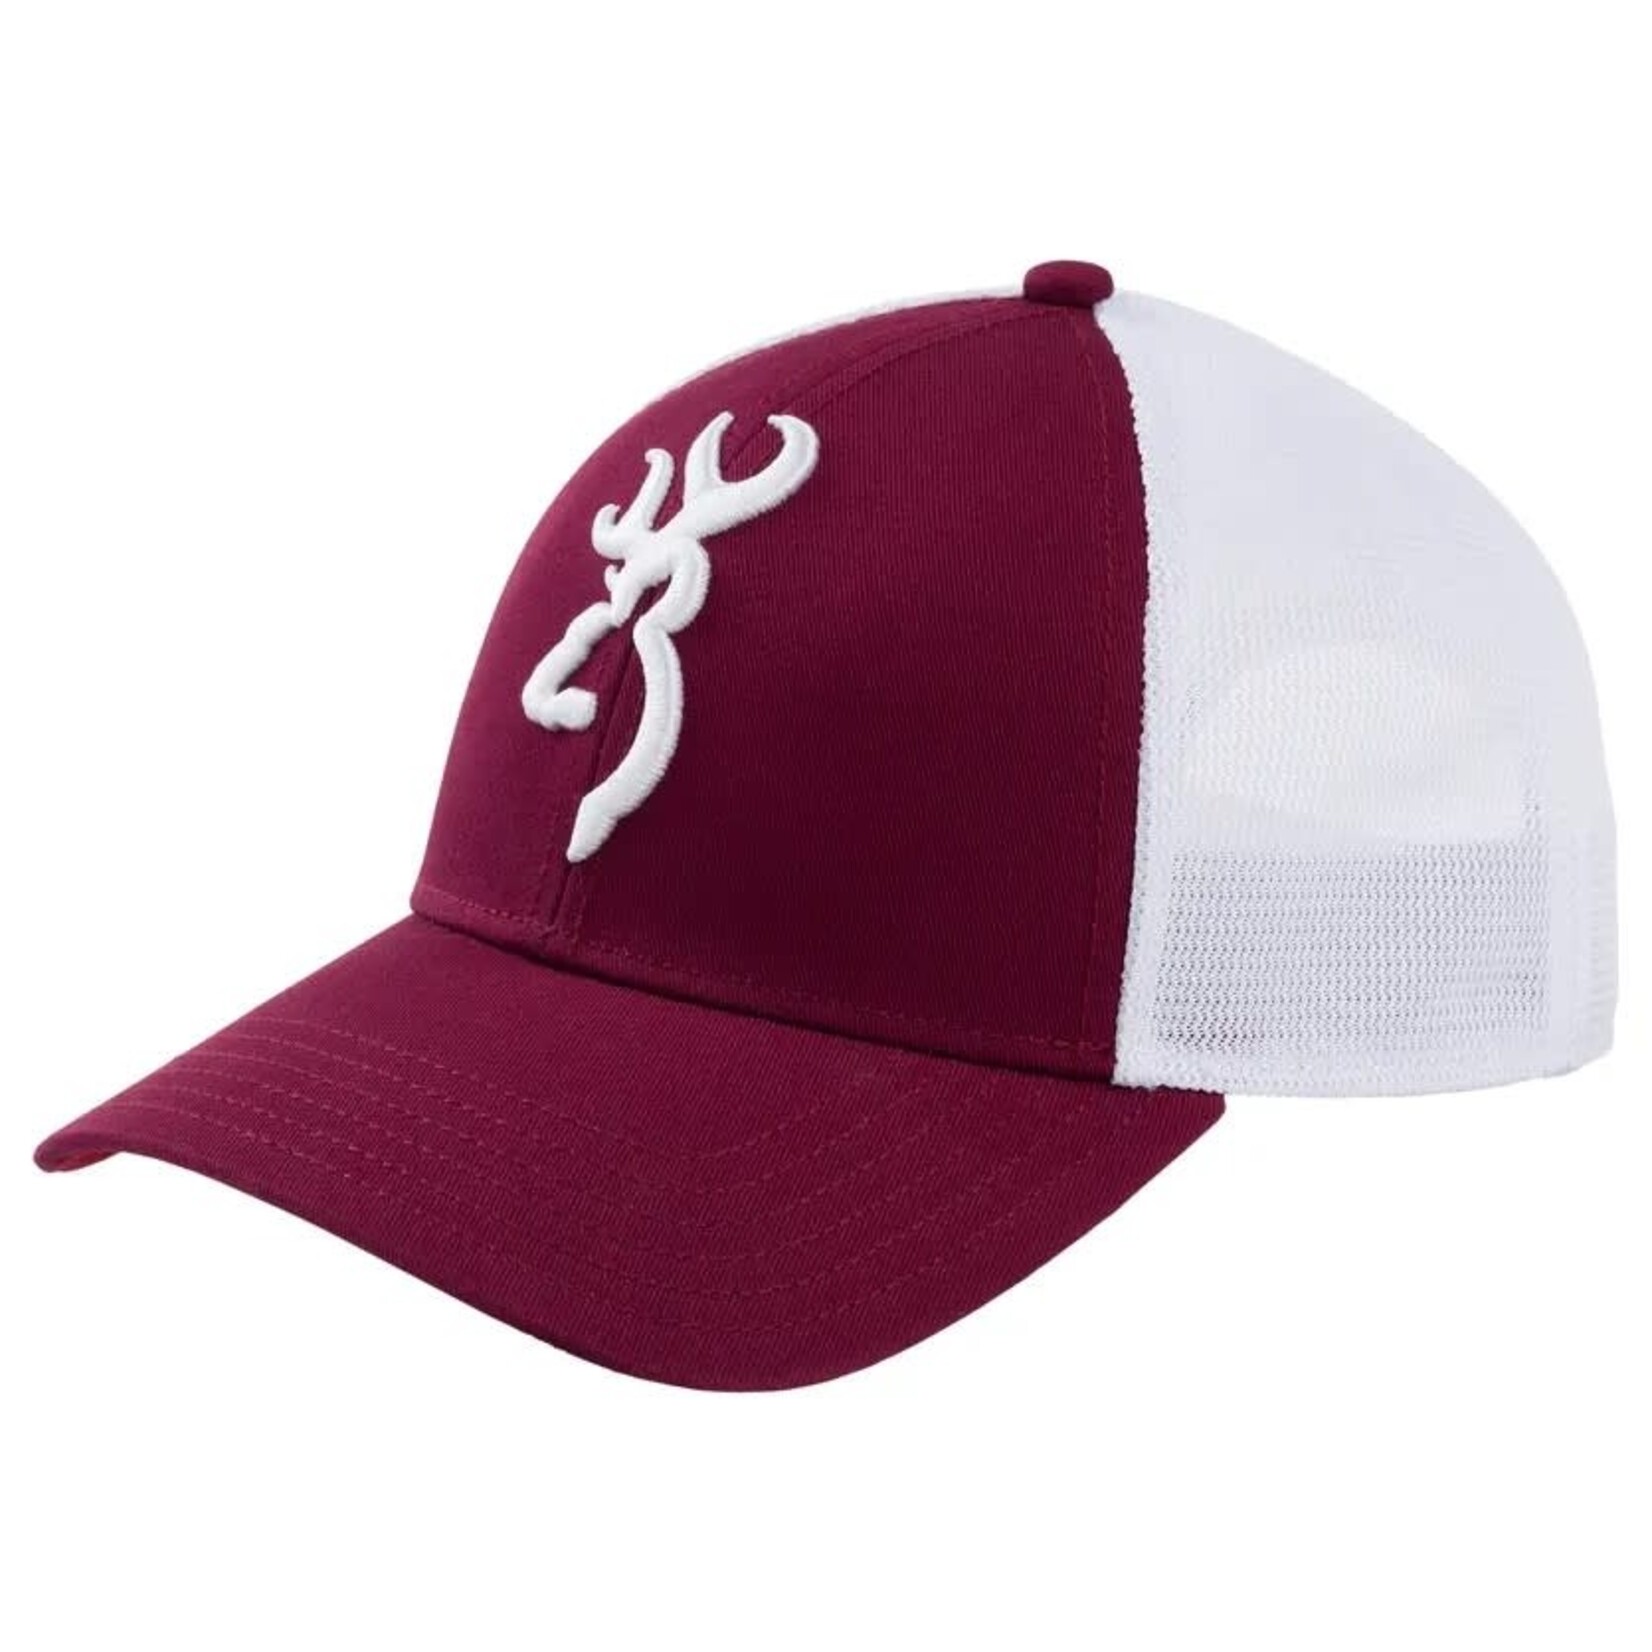 BROWNING Casquette Browning Kindle Wine Femme Bourgogne